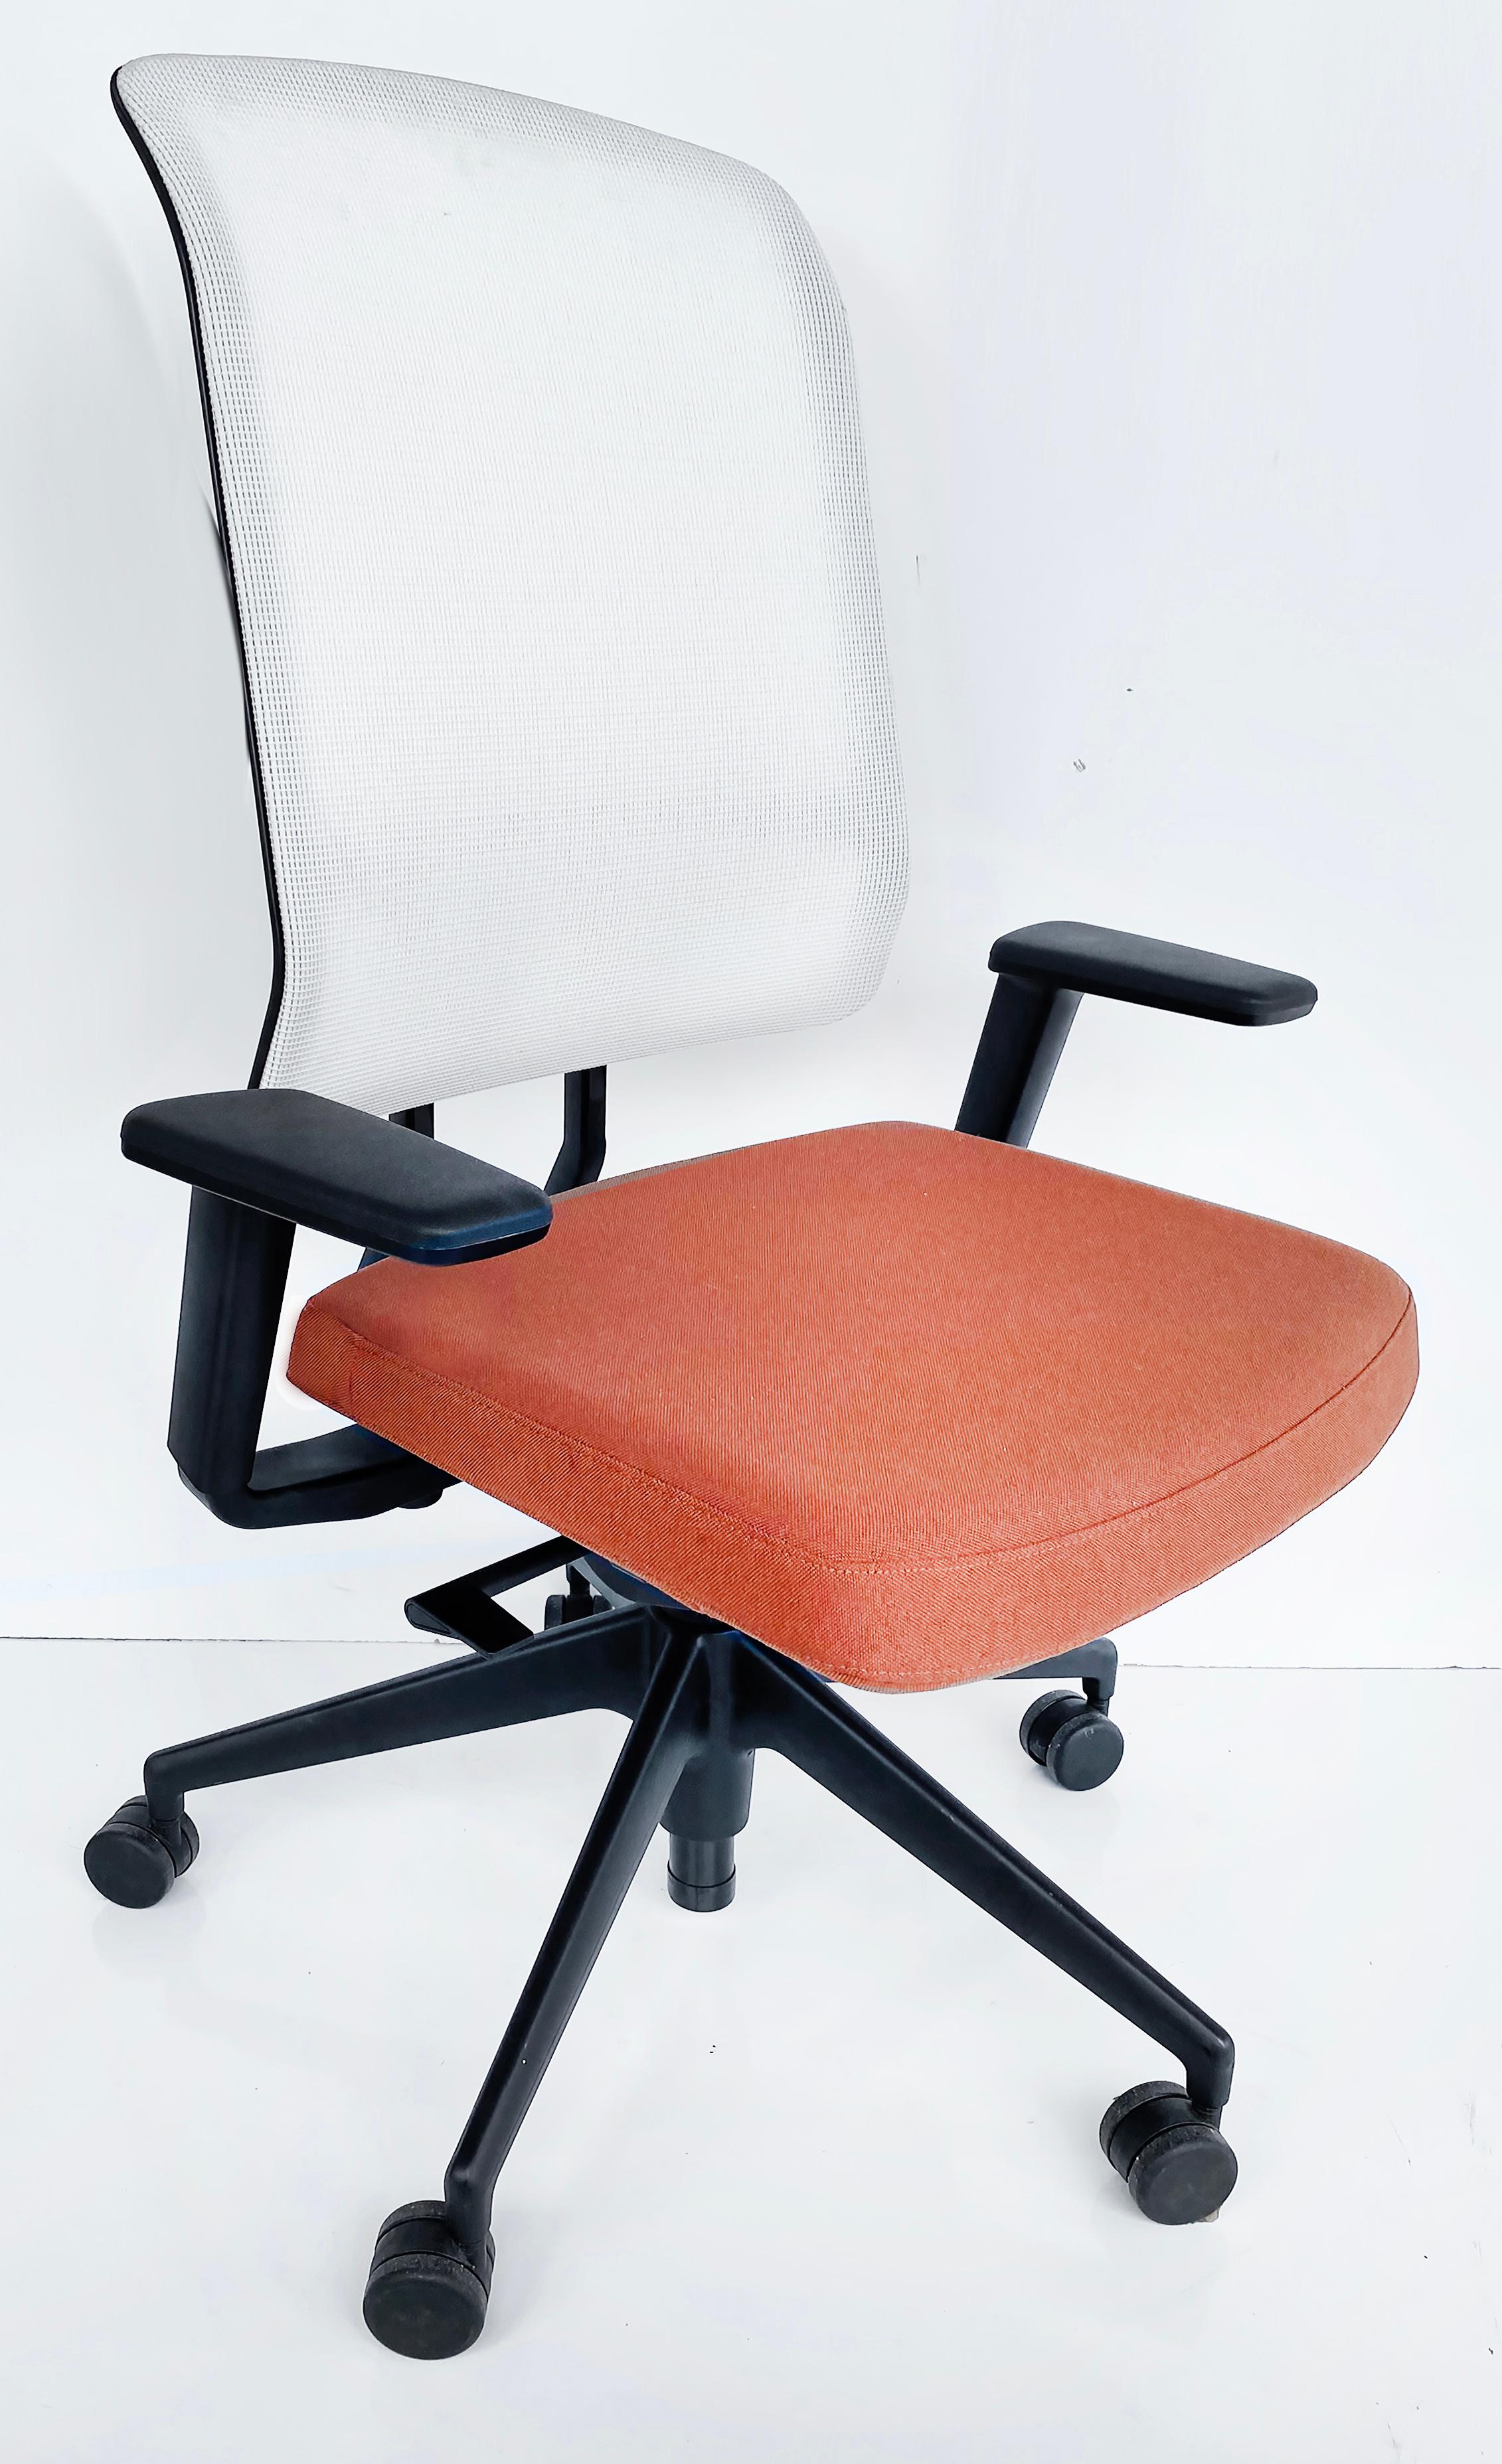 Modern Vitra AM Fully Adjustable Ergonomic Office Chairs by Alberto Meda 2021 For Sale